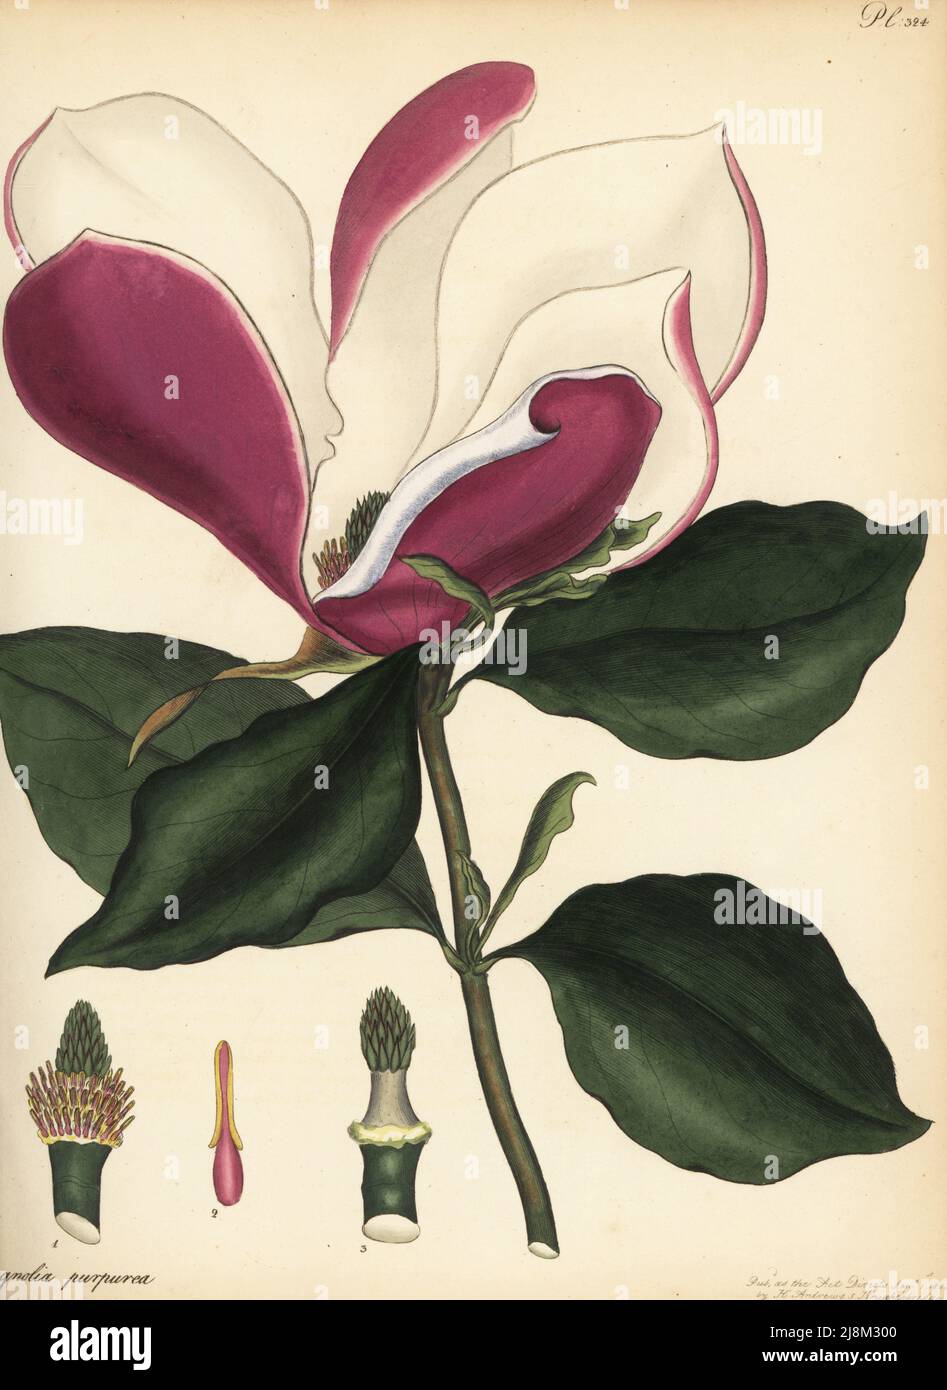 Mulan magnolia, Magnolia liliiflora. Purple-flowered magnolia, Magnolia purpurea. From China and Japan, in the conservatory of George Spencer-Churchill, the Marquis of Blandford, at White Knights. Copperplate engraving drawn, engraved and hand-coloured by Henry Andrews from his Botanical Register, Volume 5, self-published in Knightsbridge, London, 1803. Stock Photo